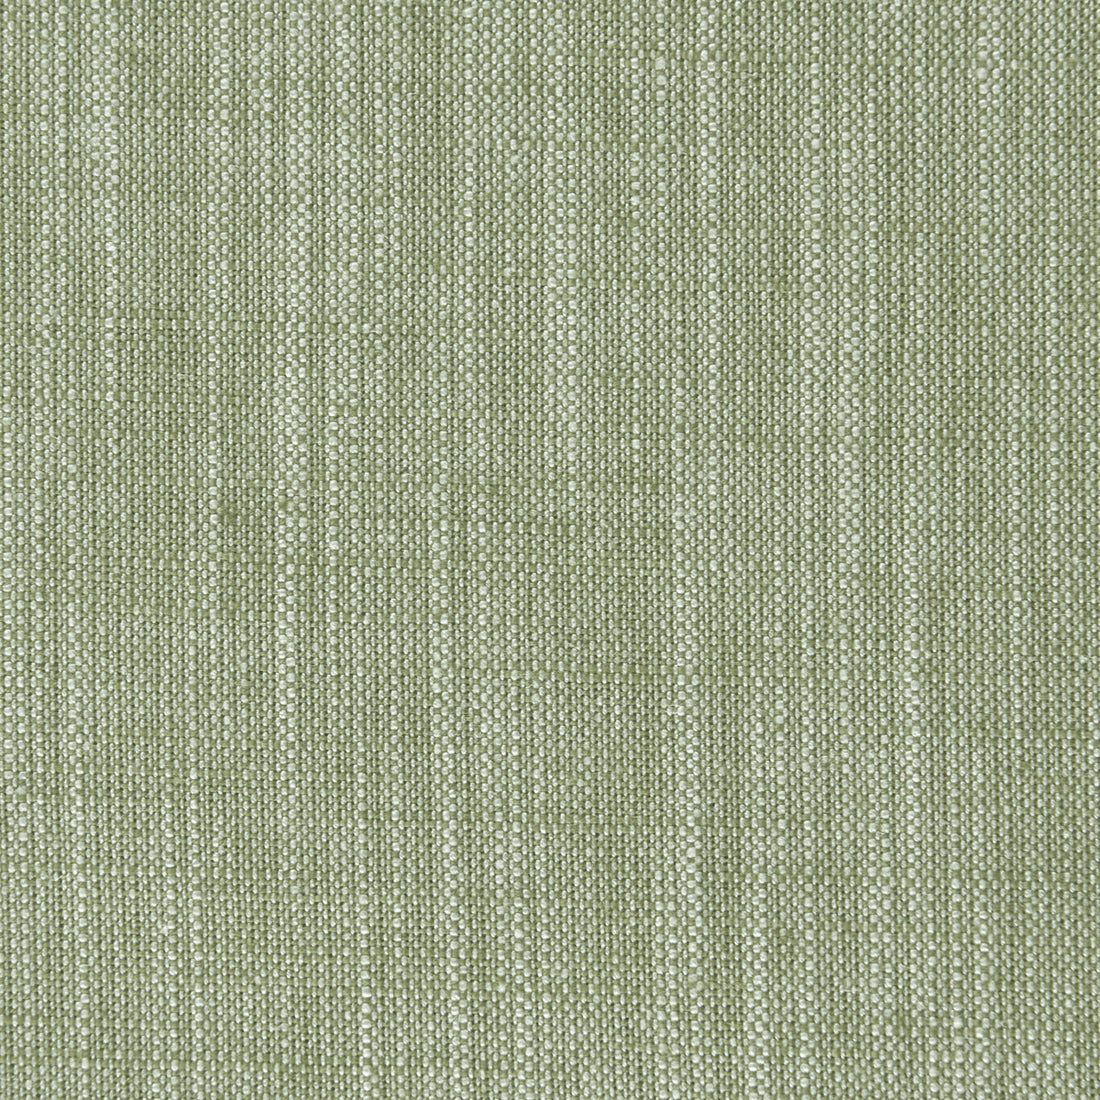 Biarritz fabric in parsley color - pattern F0965/36.CAC.0 - by Clarke And Clarke in the Clarke &amp; Clarke Biarritz collection